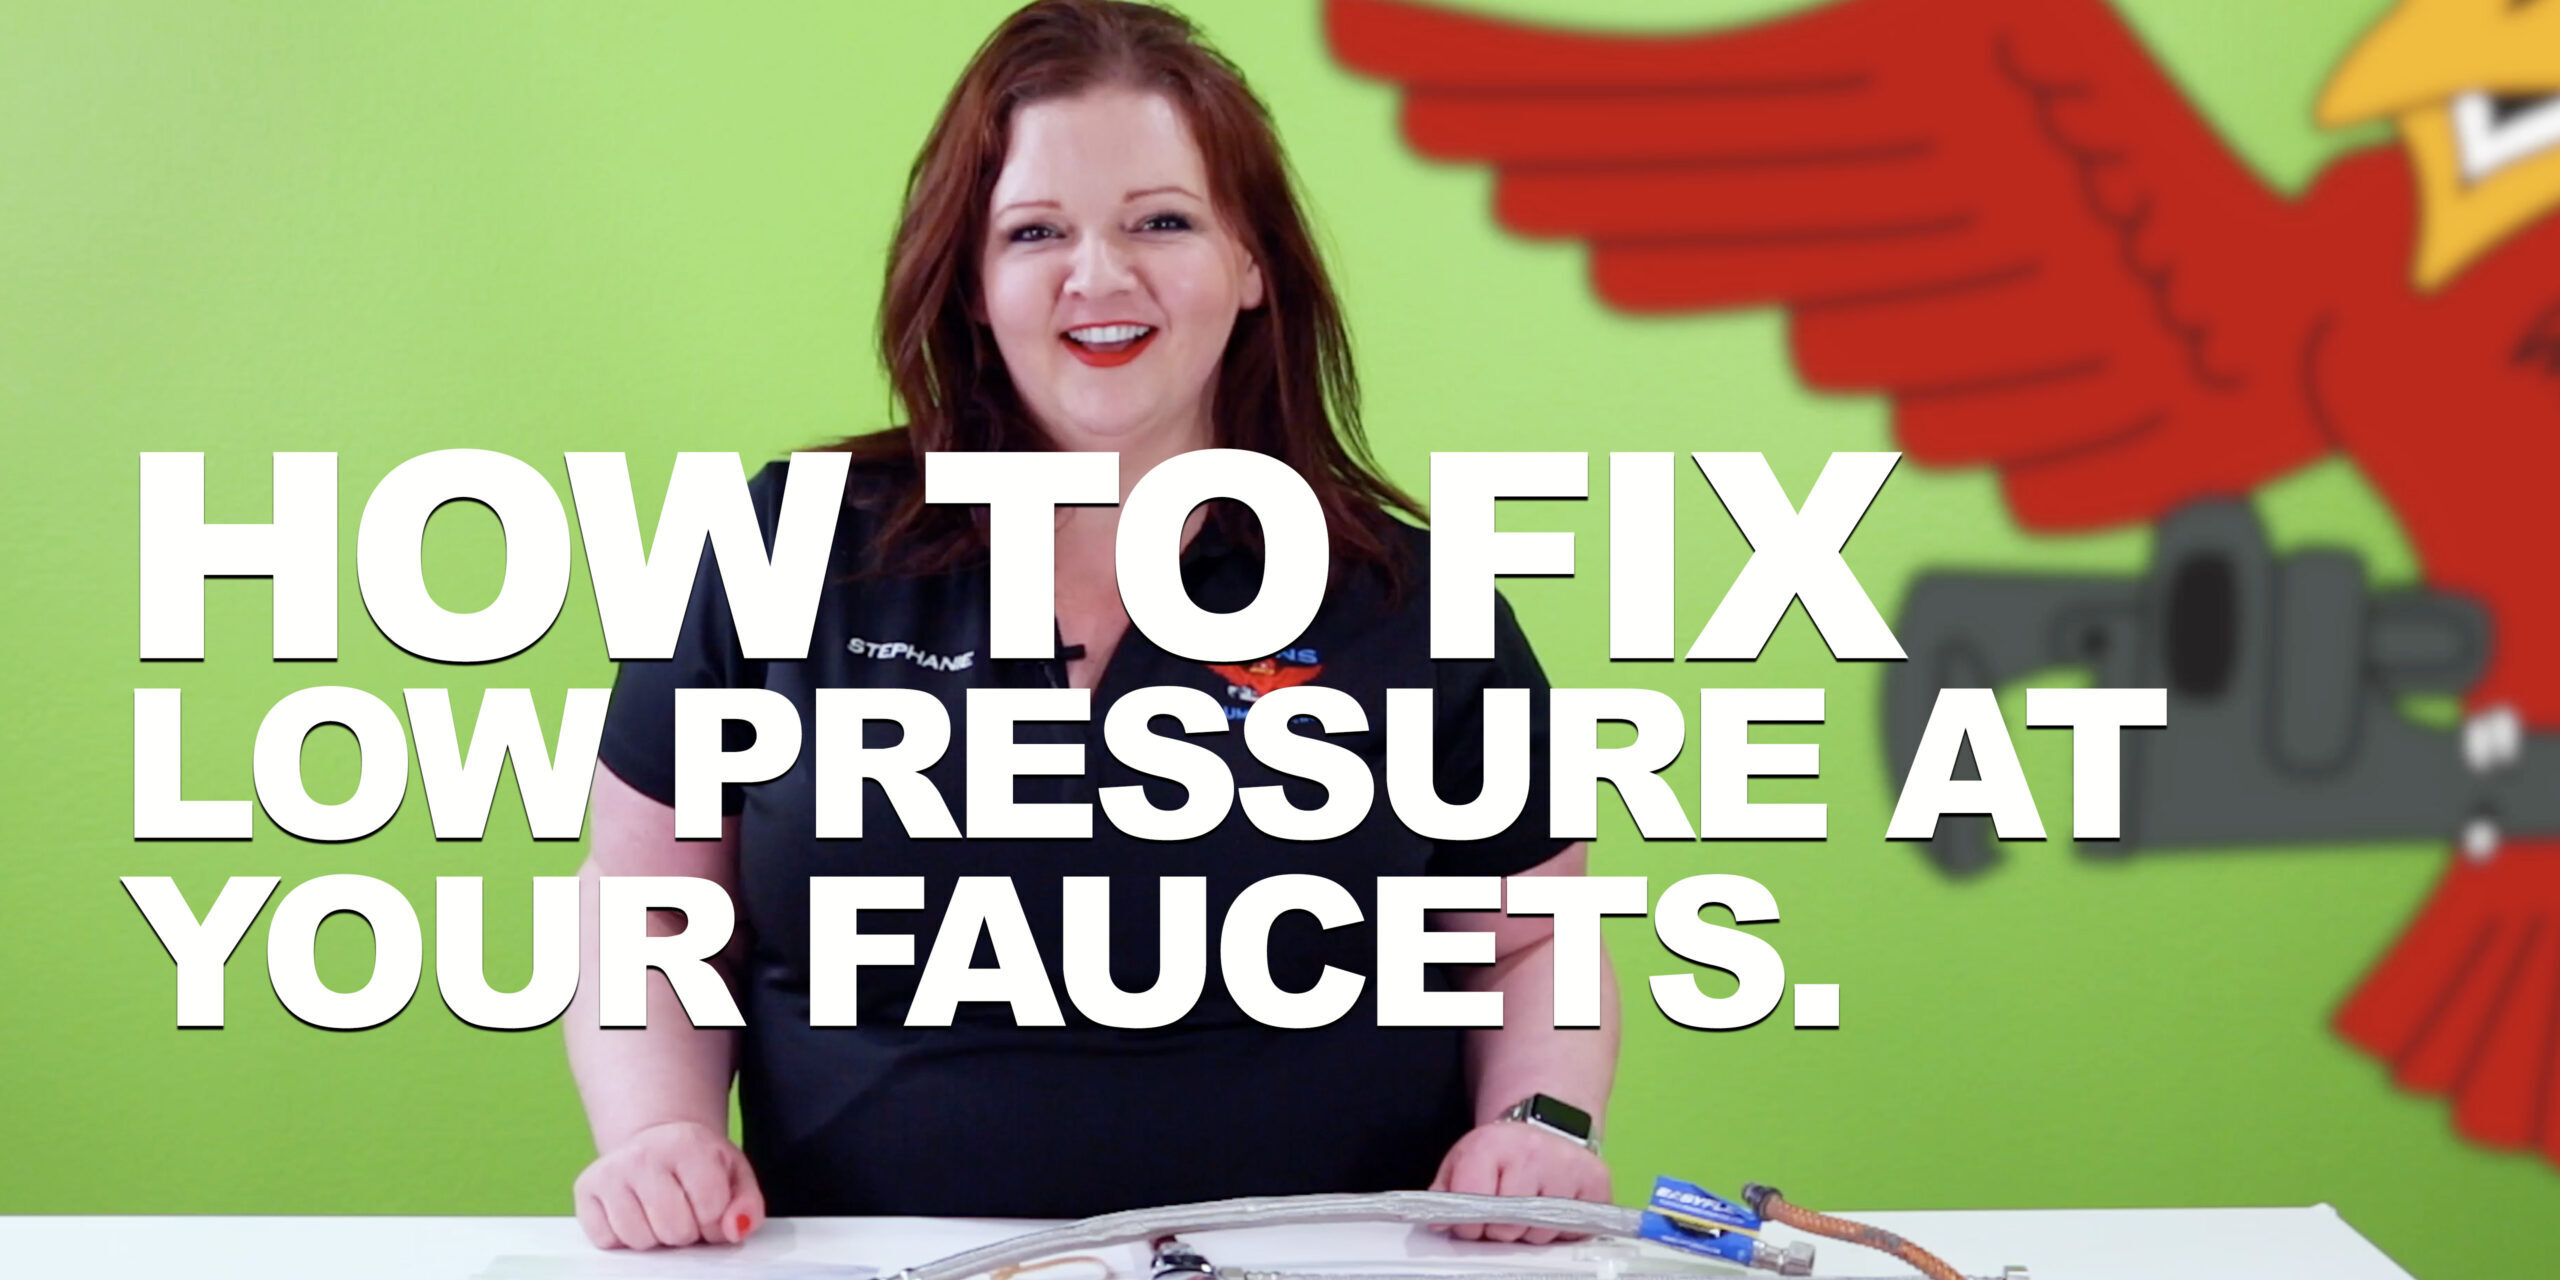 Cover photo for blog and video "How to Fix Low Pressure at Your Faucets"